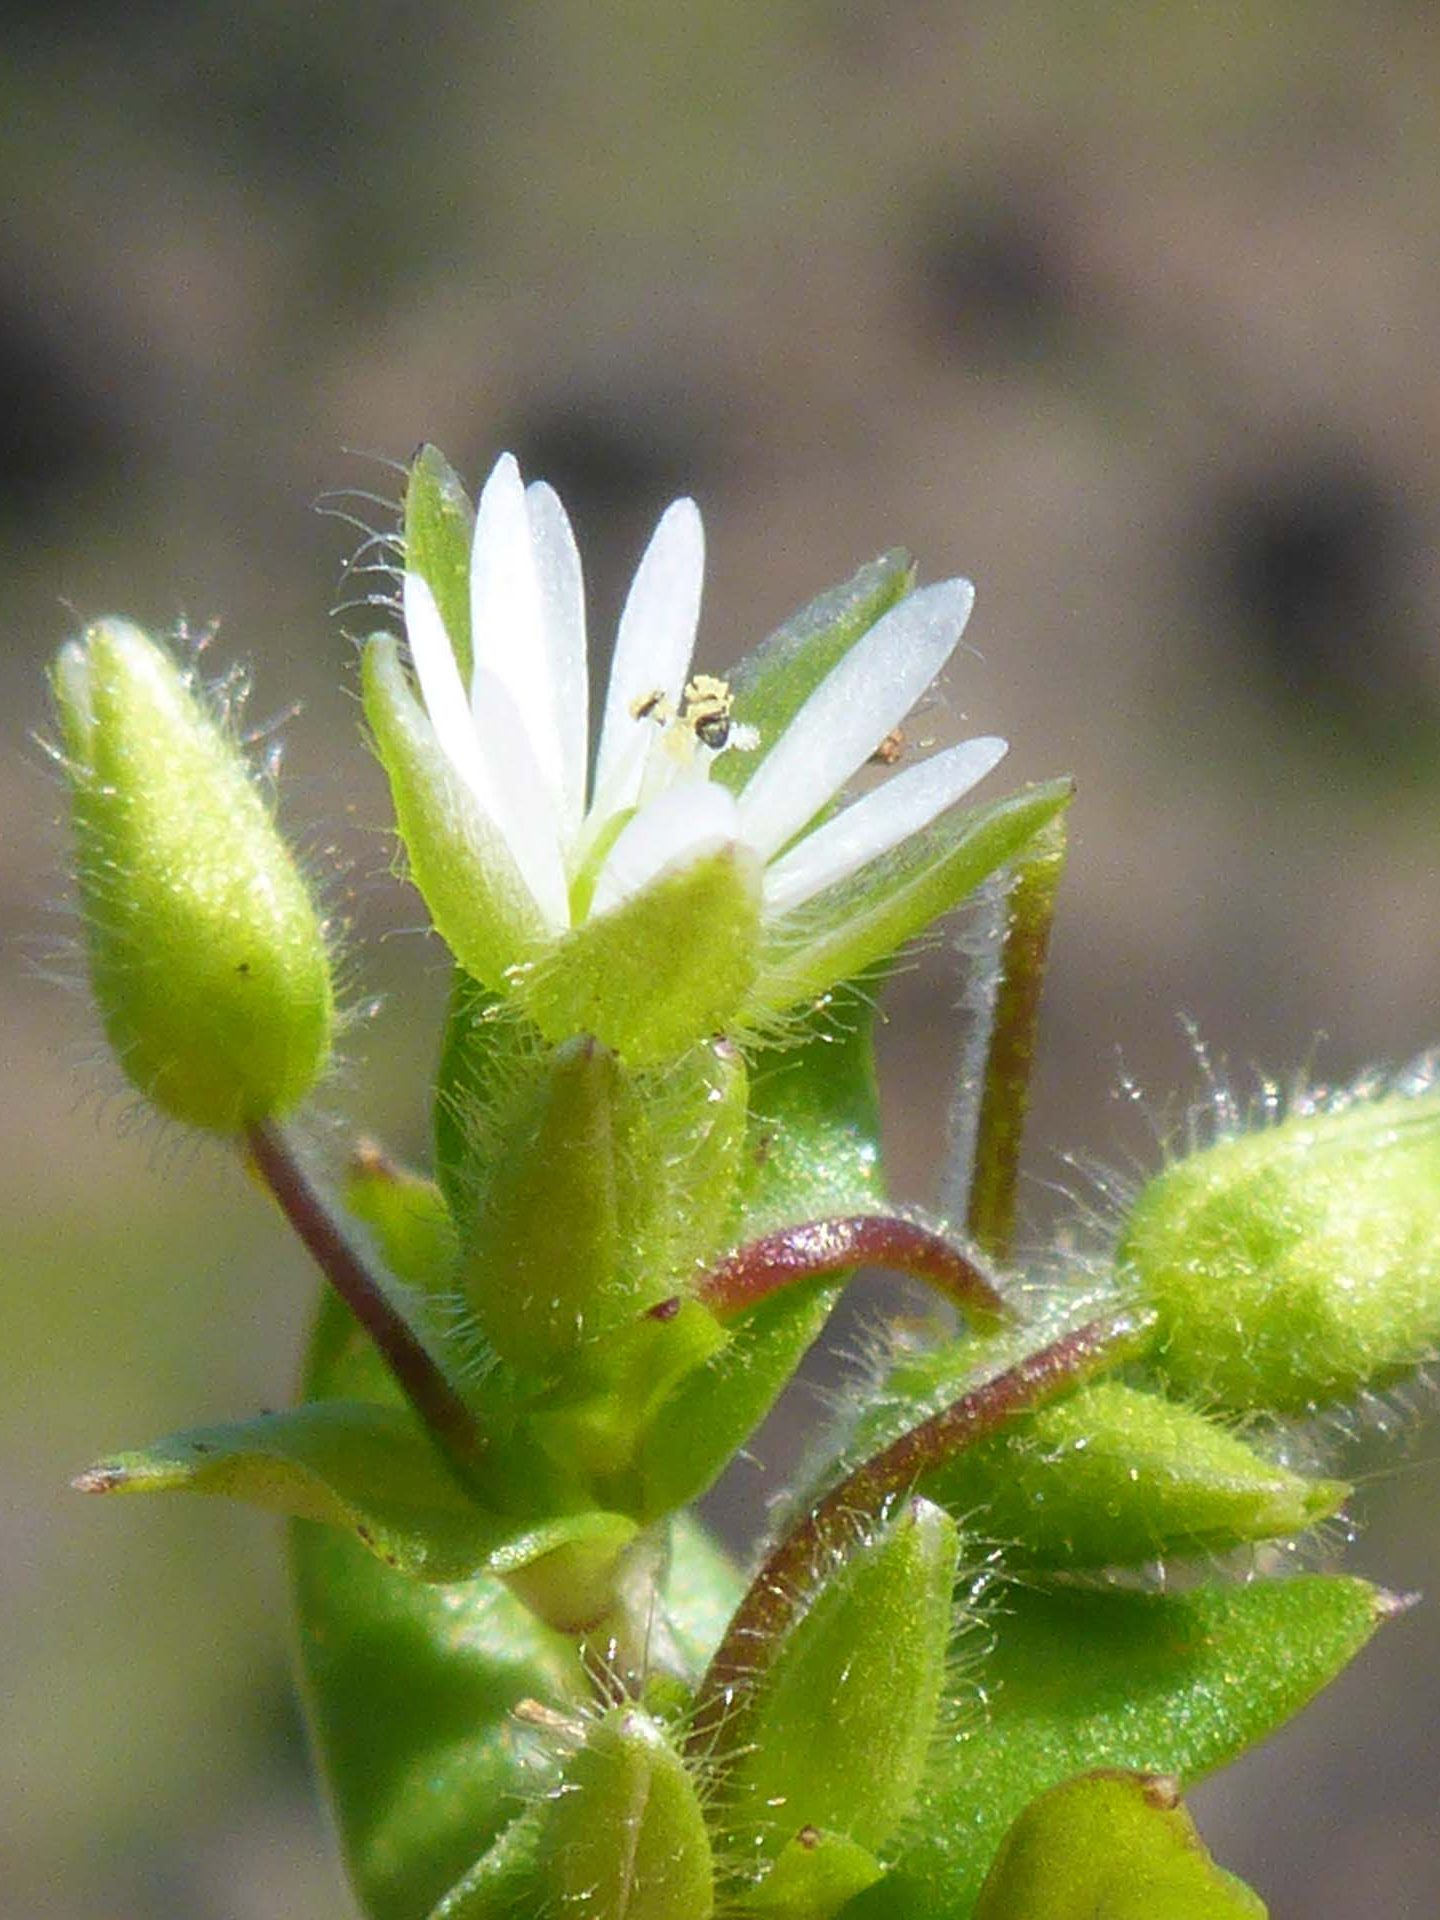 Common chickweed. D. Burk.